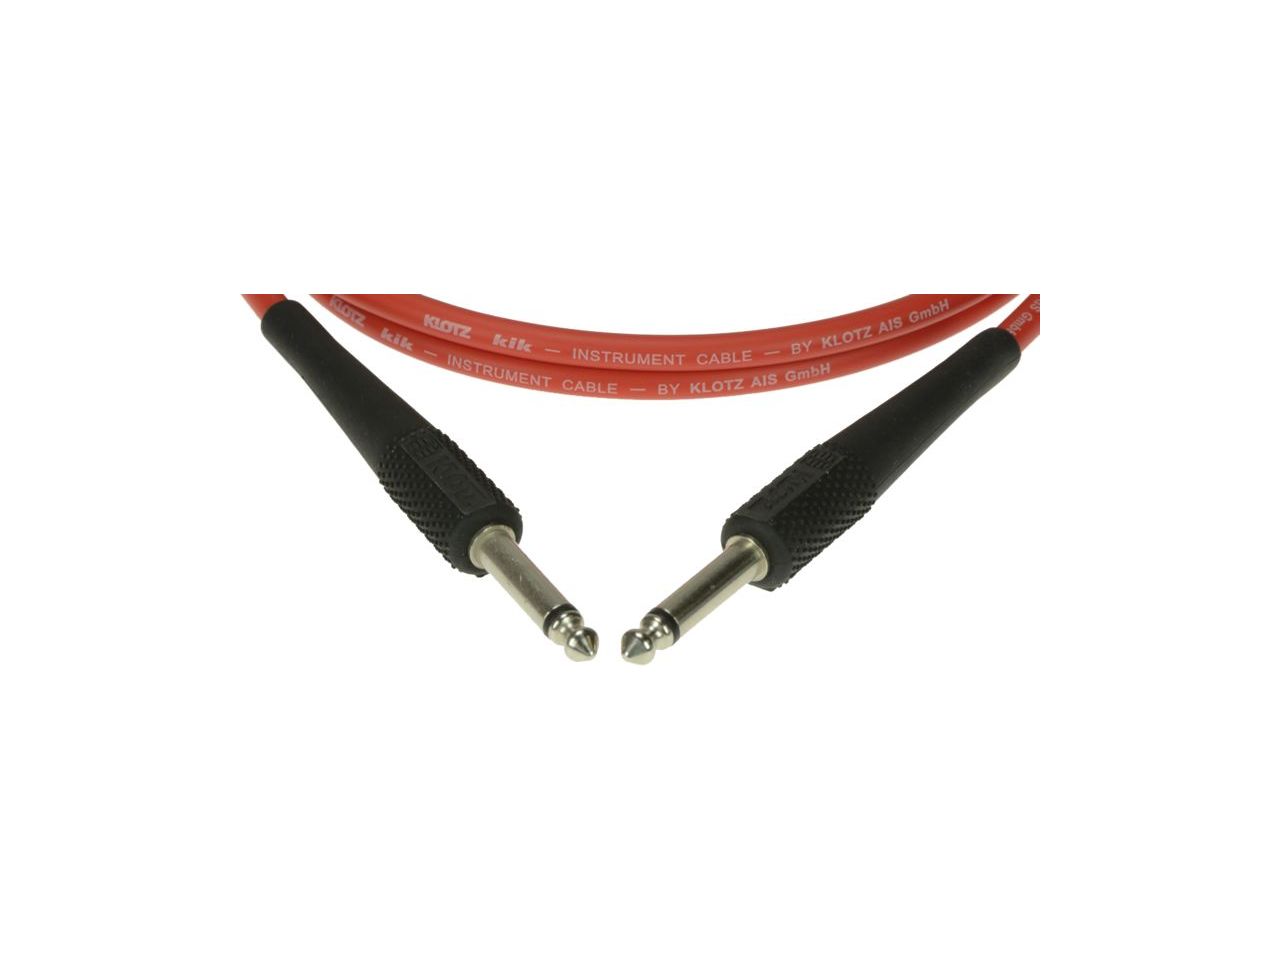 Klotz Professional Instrument Cable - Straight/Straight